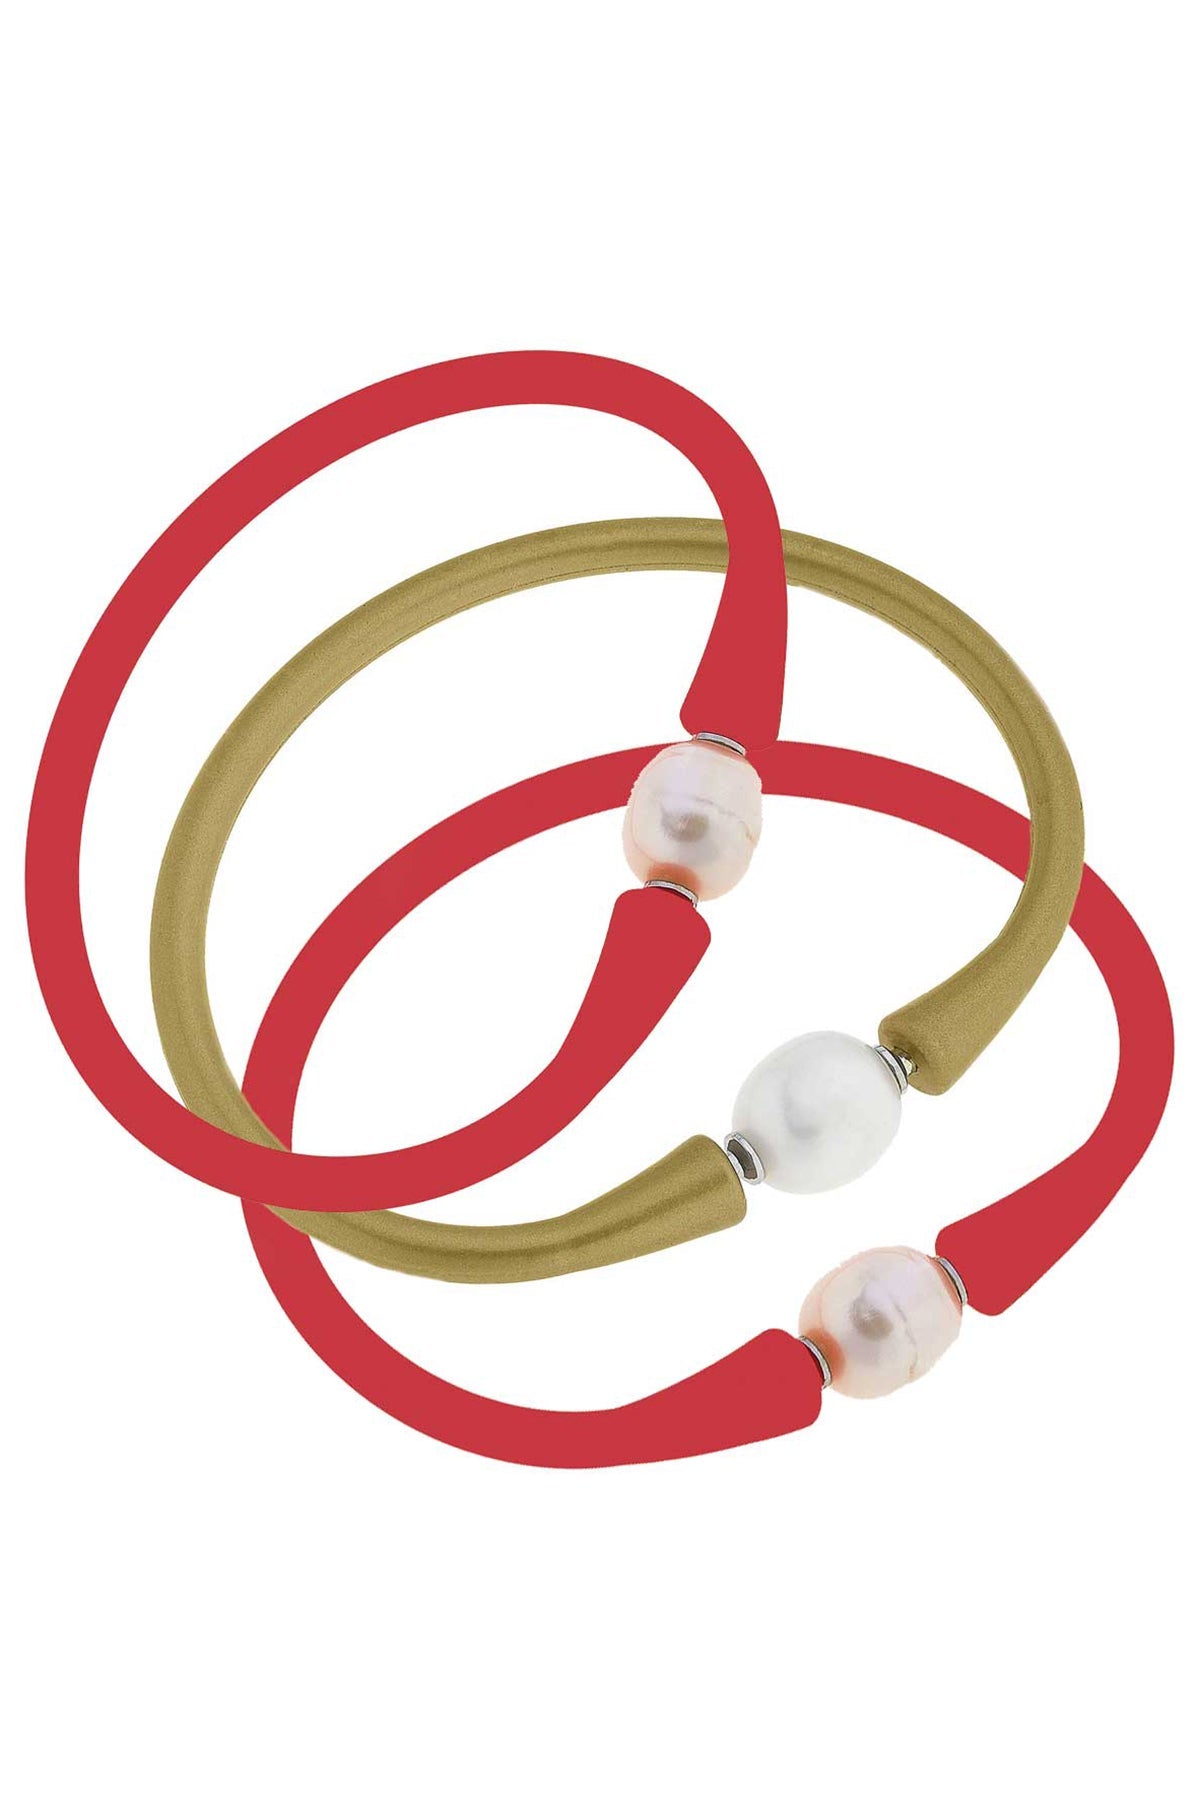 Bali Game Day Bracelet Set of 3 in Red & Gold